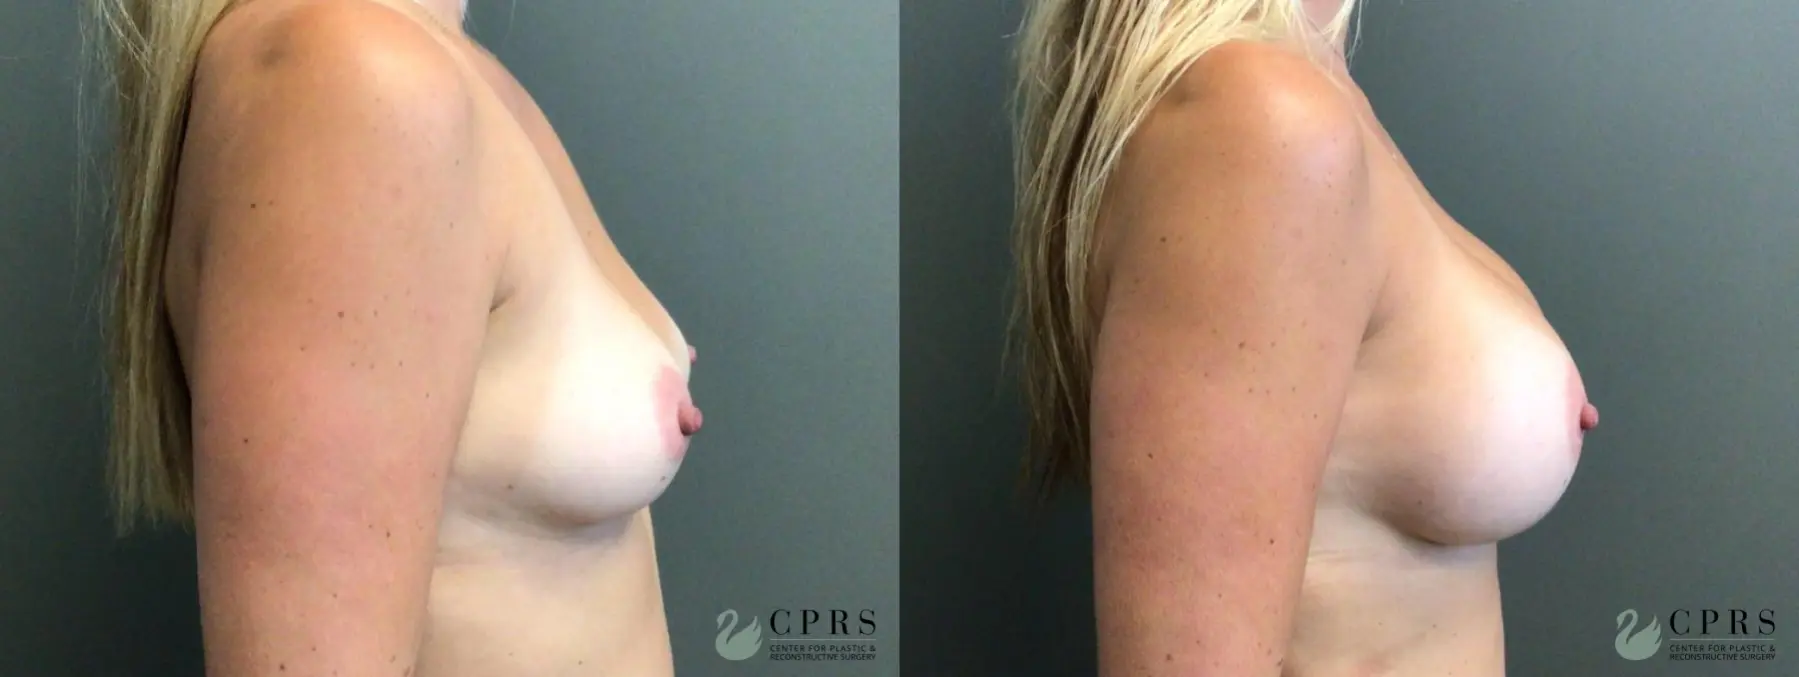 Breast Augmentation: Patient 13 - Before and After 2